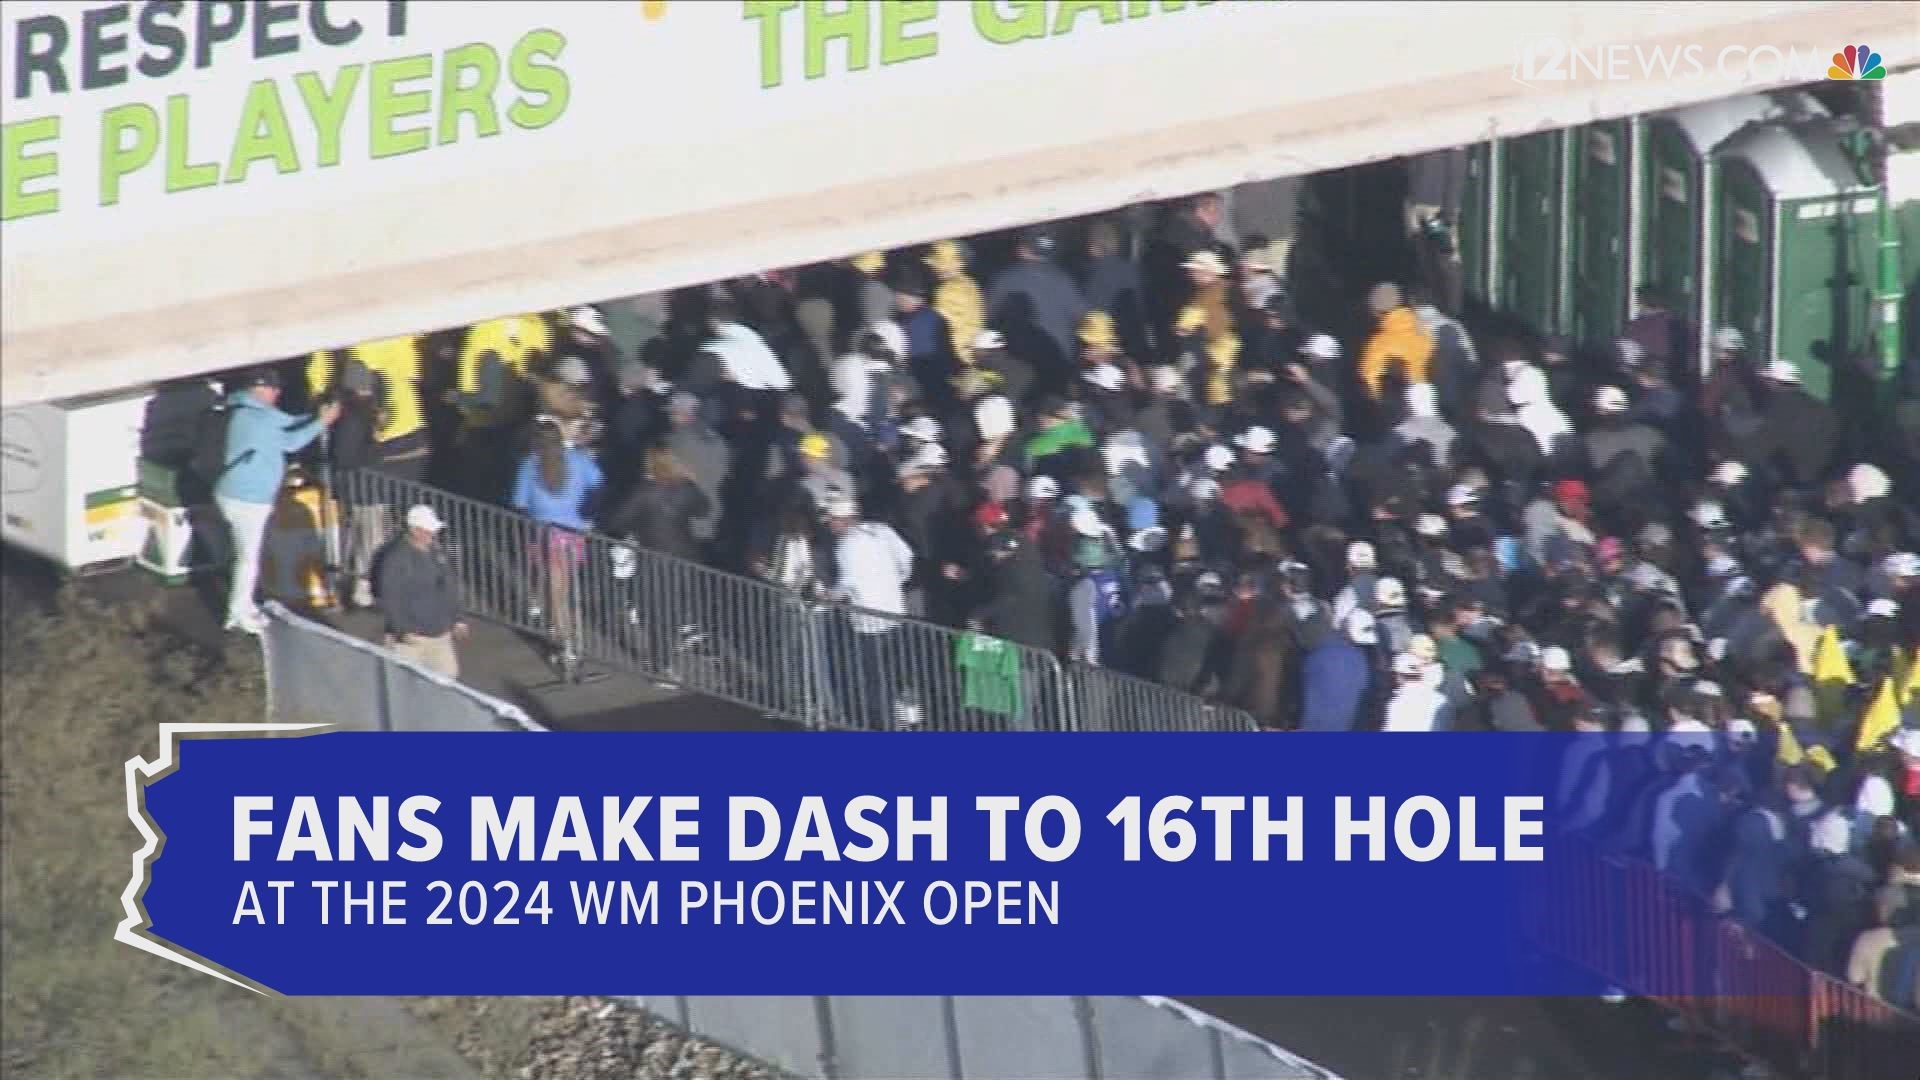 Fan line up early to make the dash to the 16th hole at the TPC Scottsdale during the 2024 WM Phoenix Open.